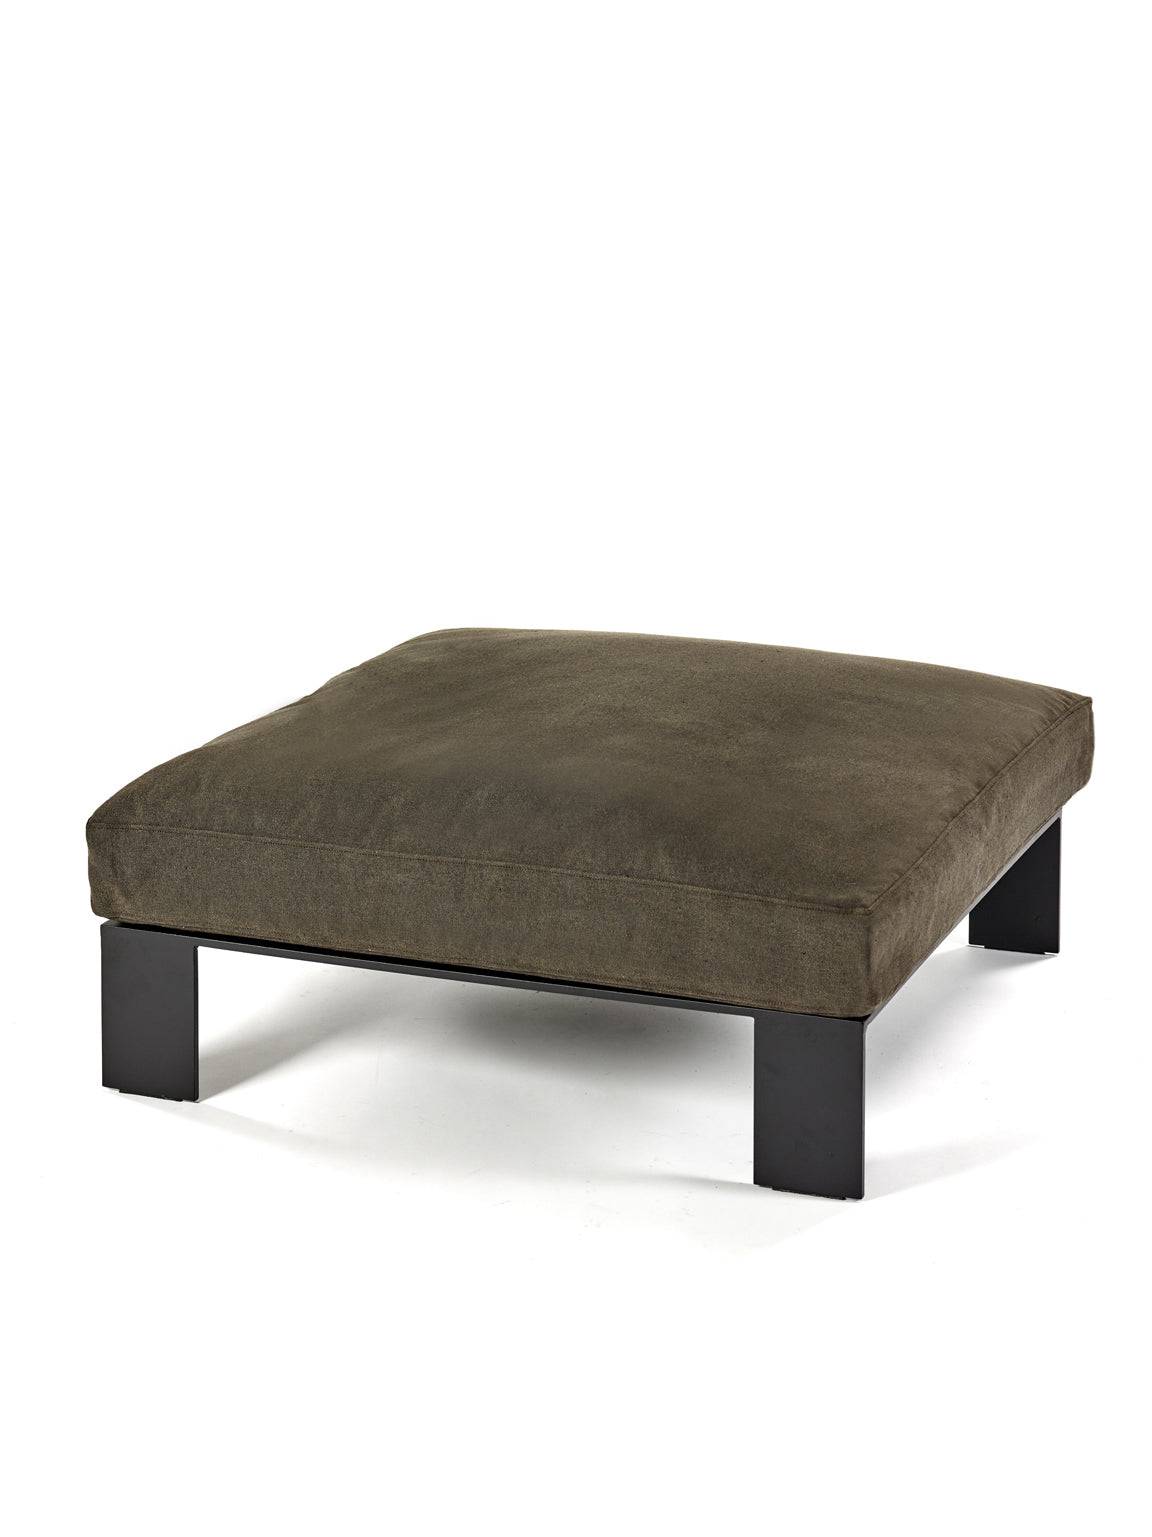 Mombaers Ottoman - Sepia - THAT COOL LIVING